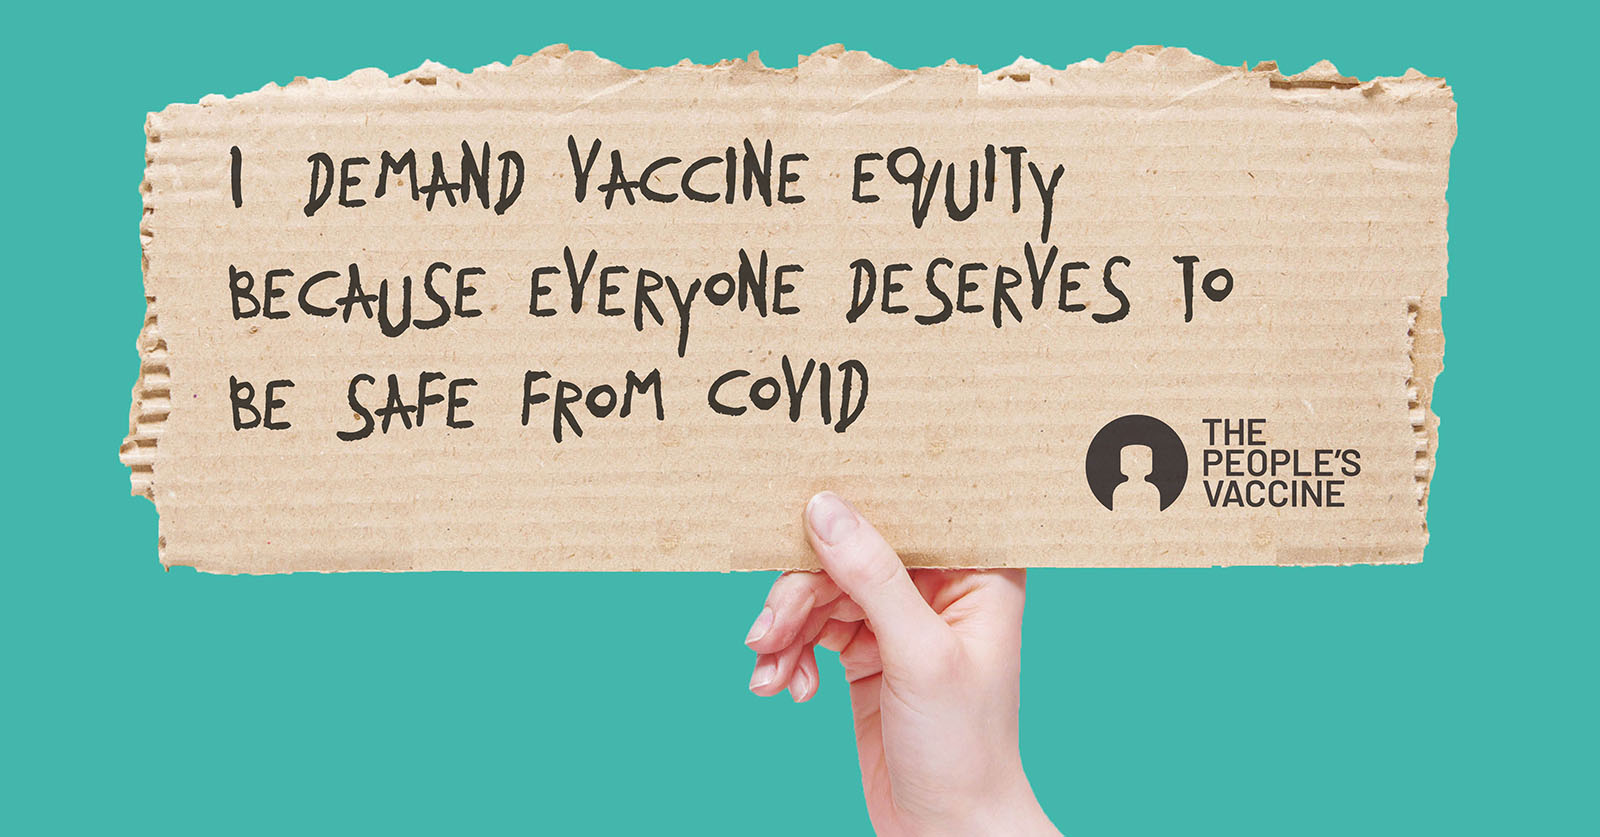 I demand vaccine equity because everyone deserves to be safe from Covid